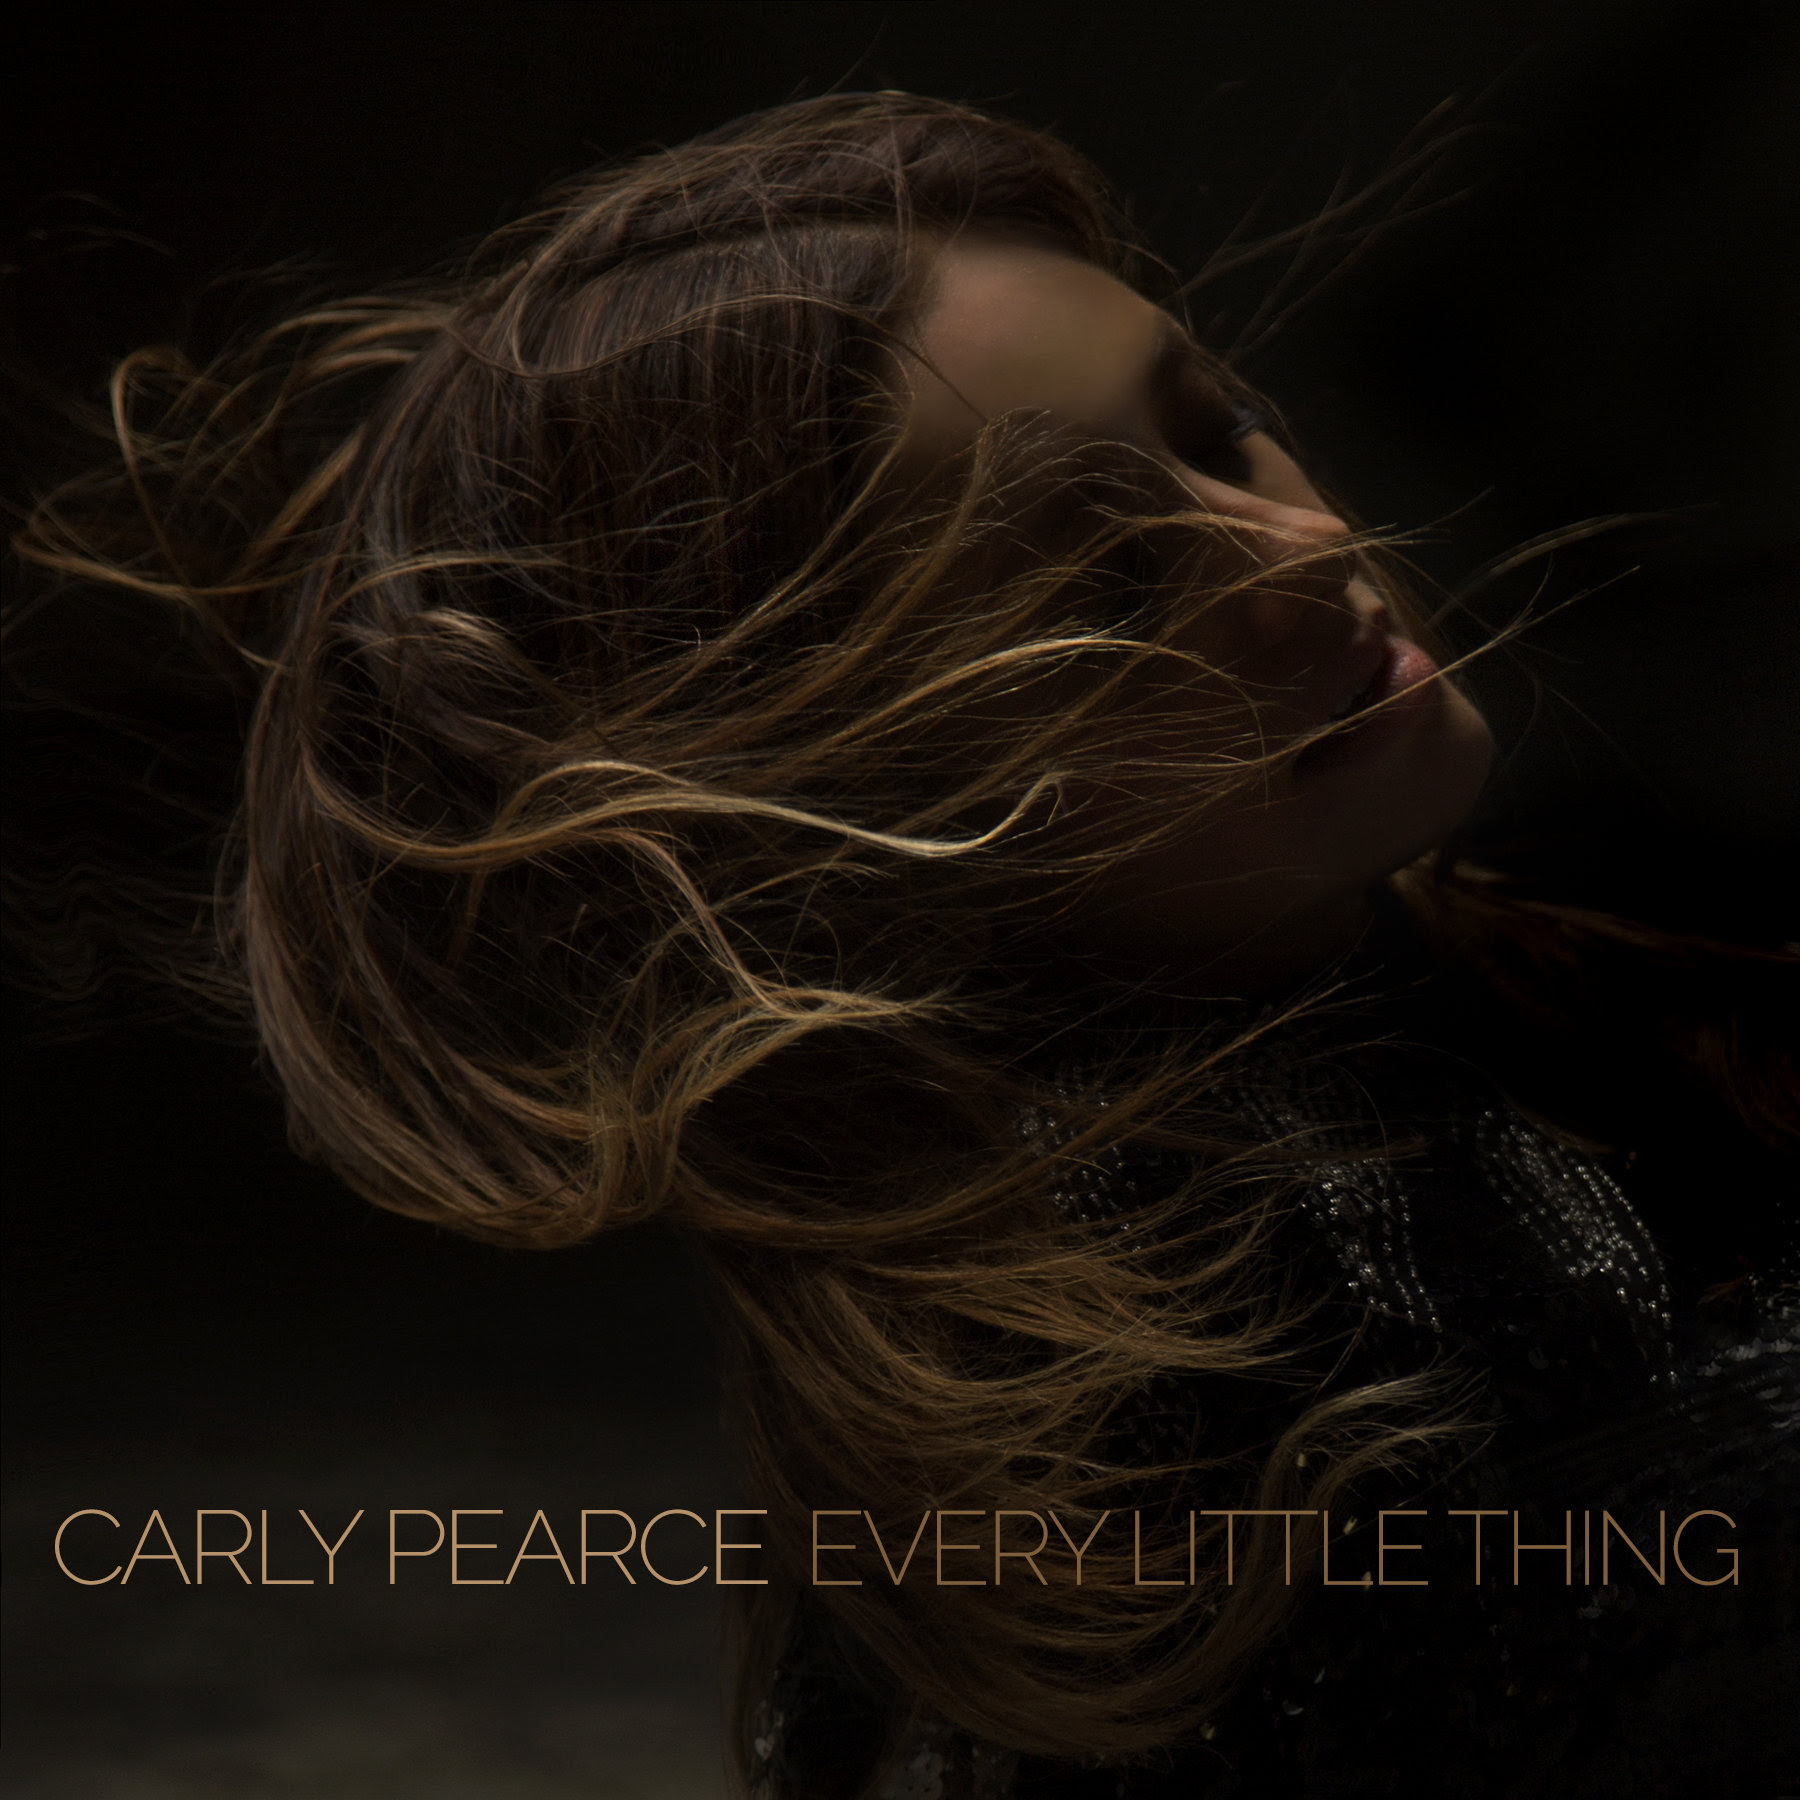 Carly Pearce Brings “Every Little Thing” to Country Radio